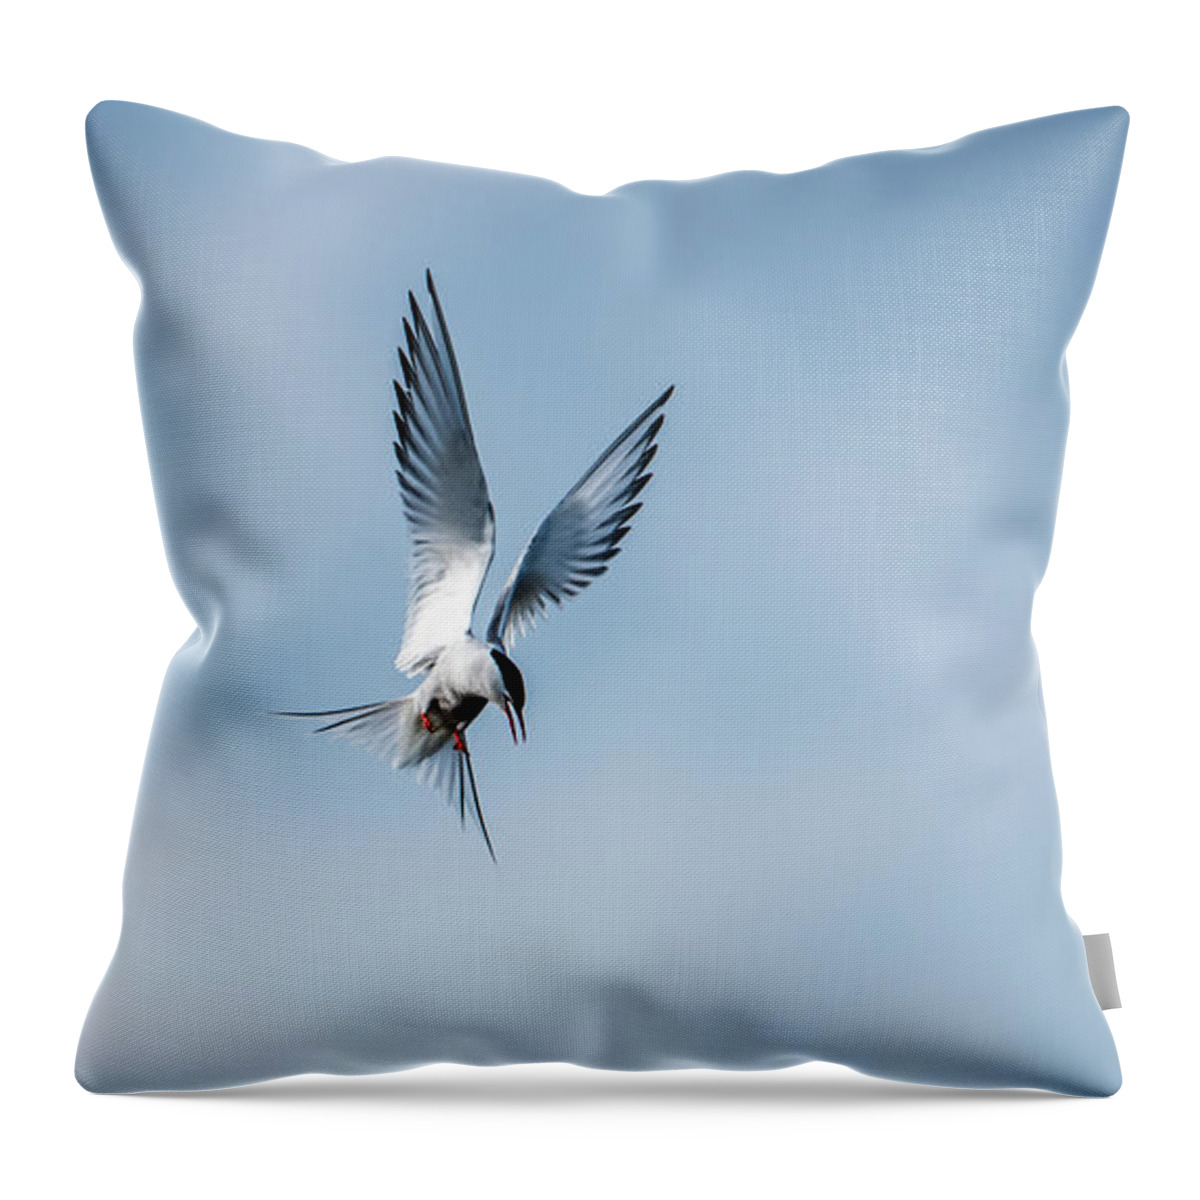 Aha A Fish Throw Pillow featuring the photograph Aha a fish by Torbjorn Swenelius